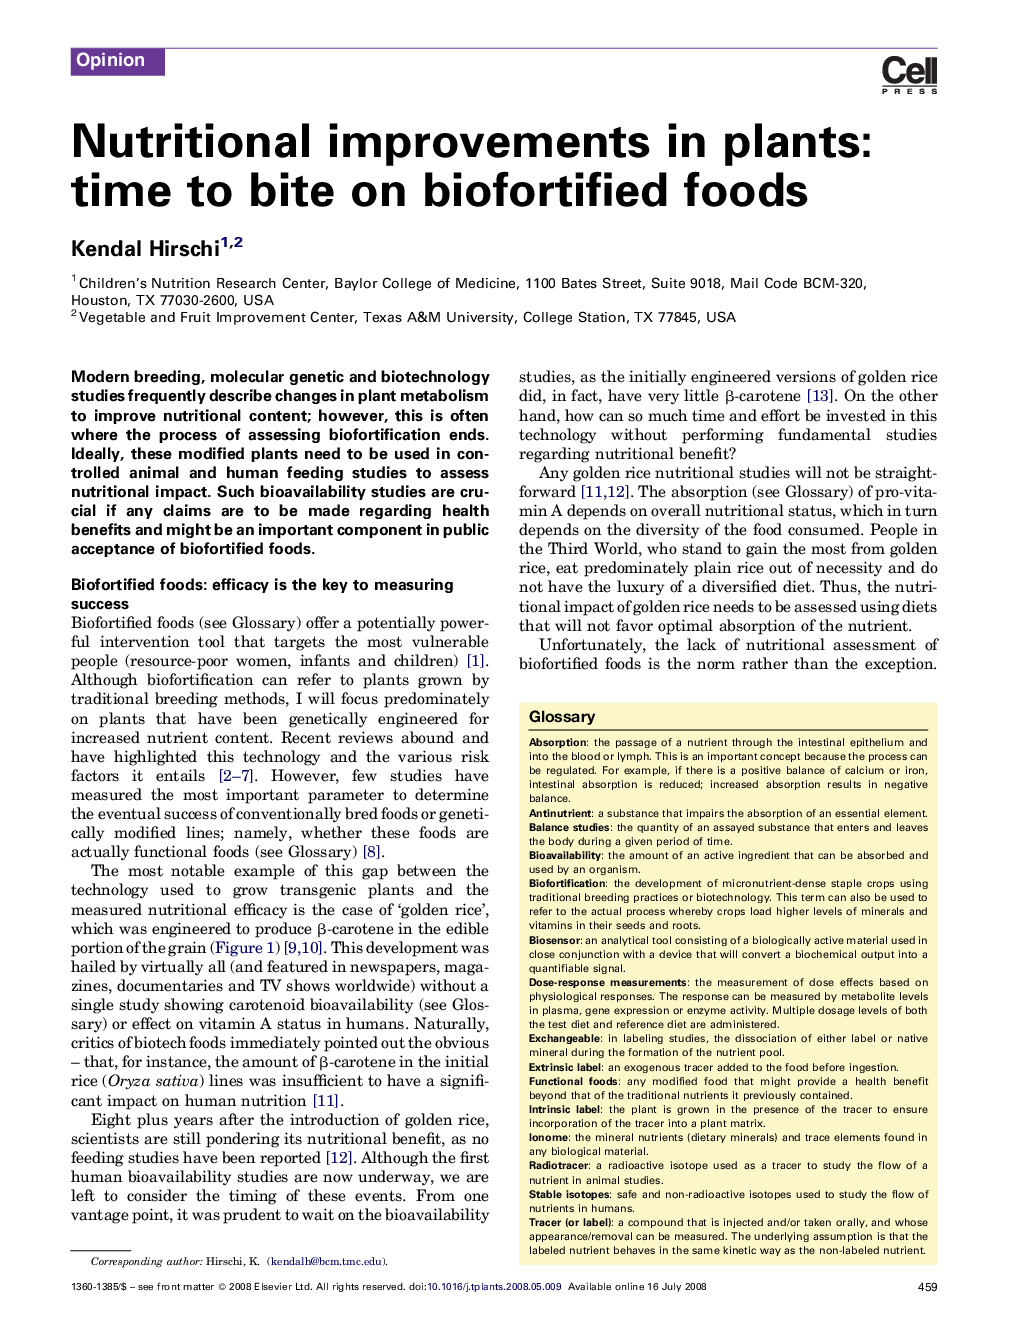 Nutritional improvements in plants: time to bite on biofortified foods